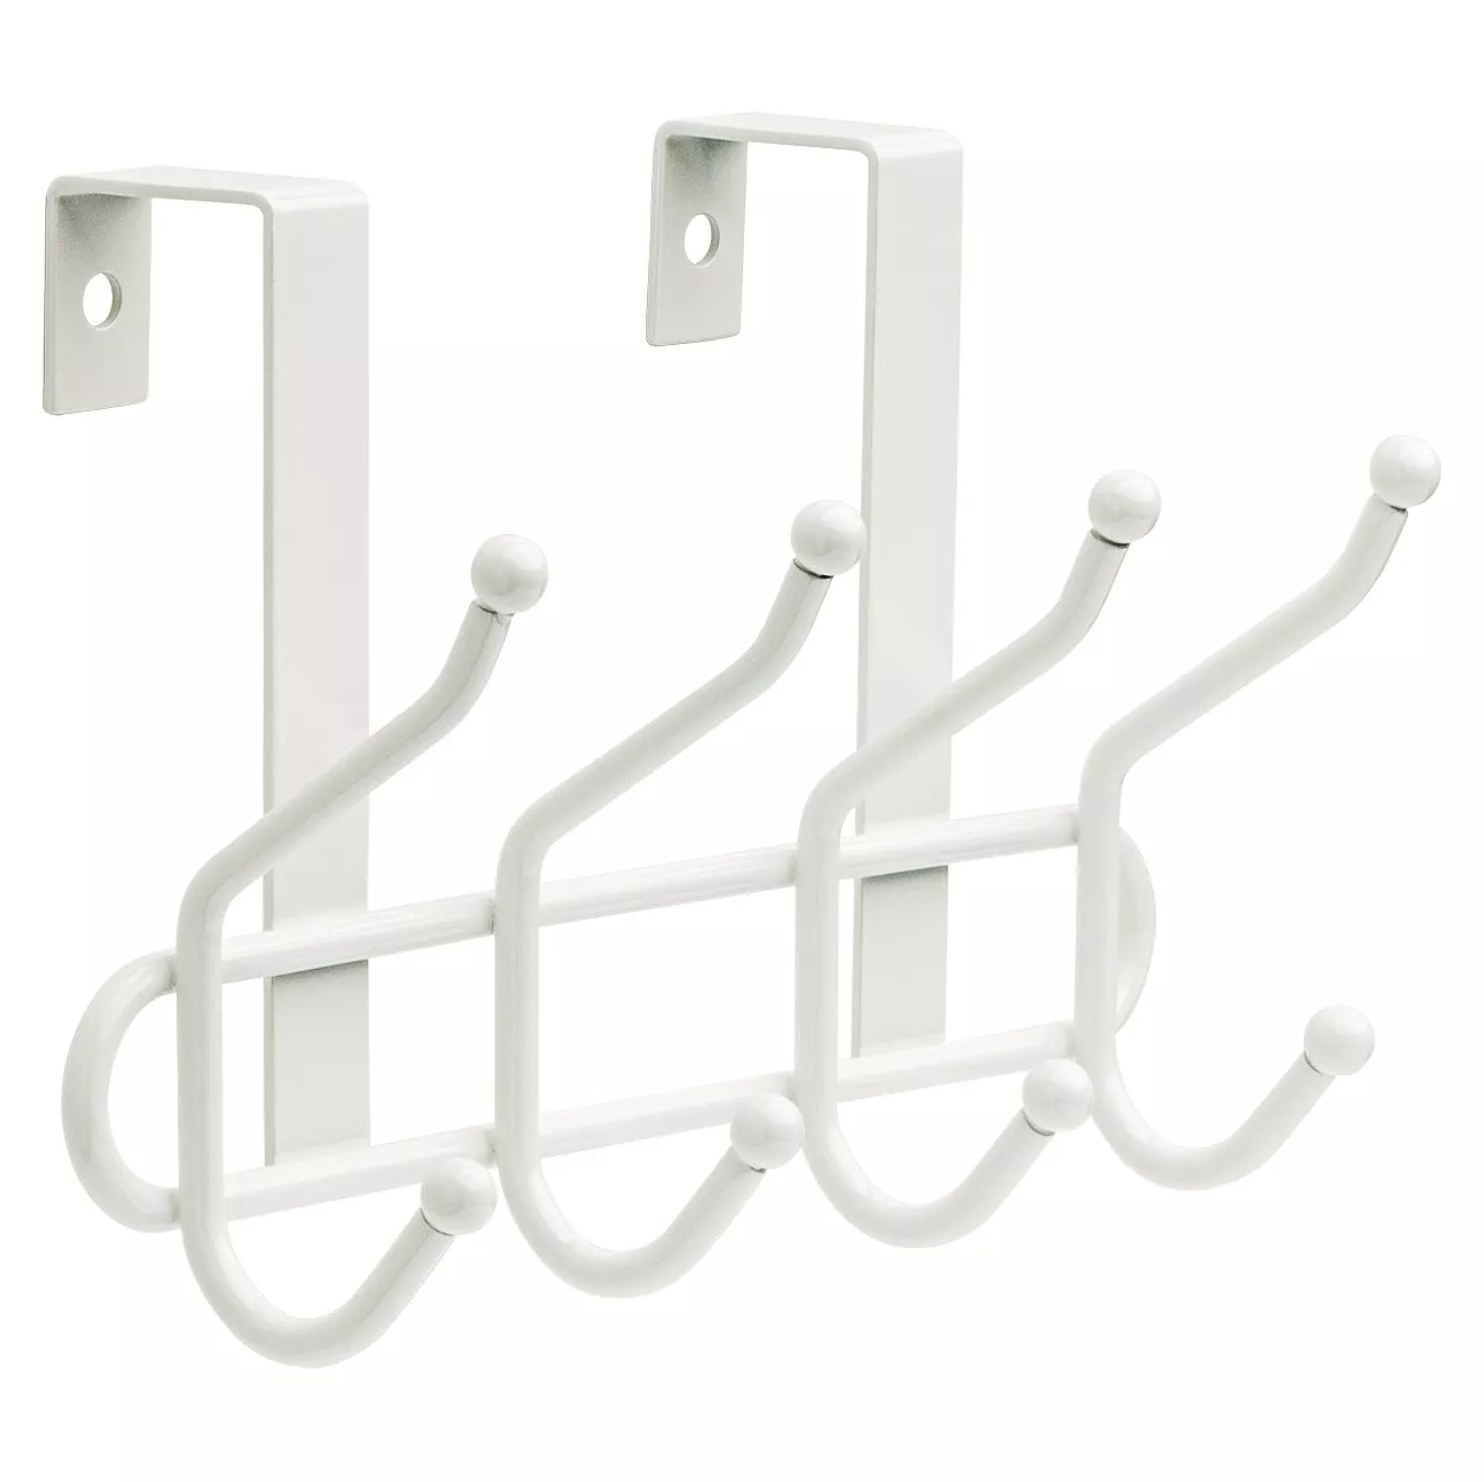 The white holder, which has four hooks 